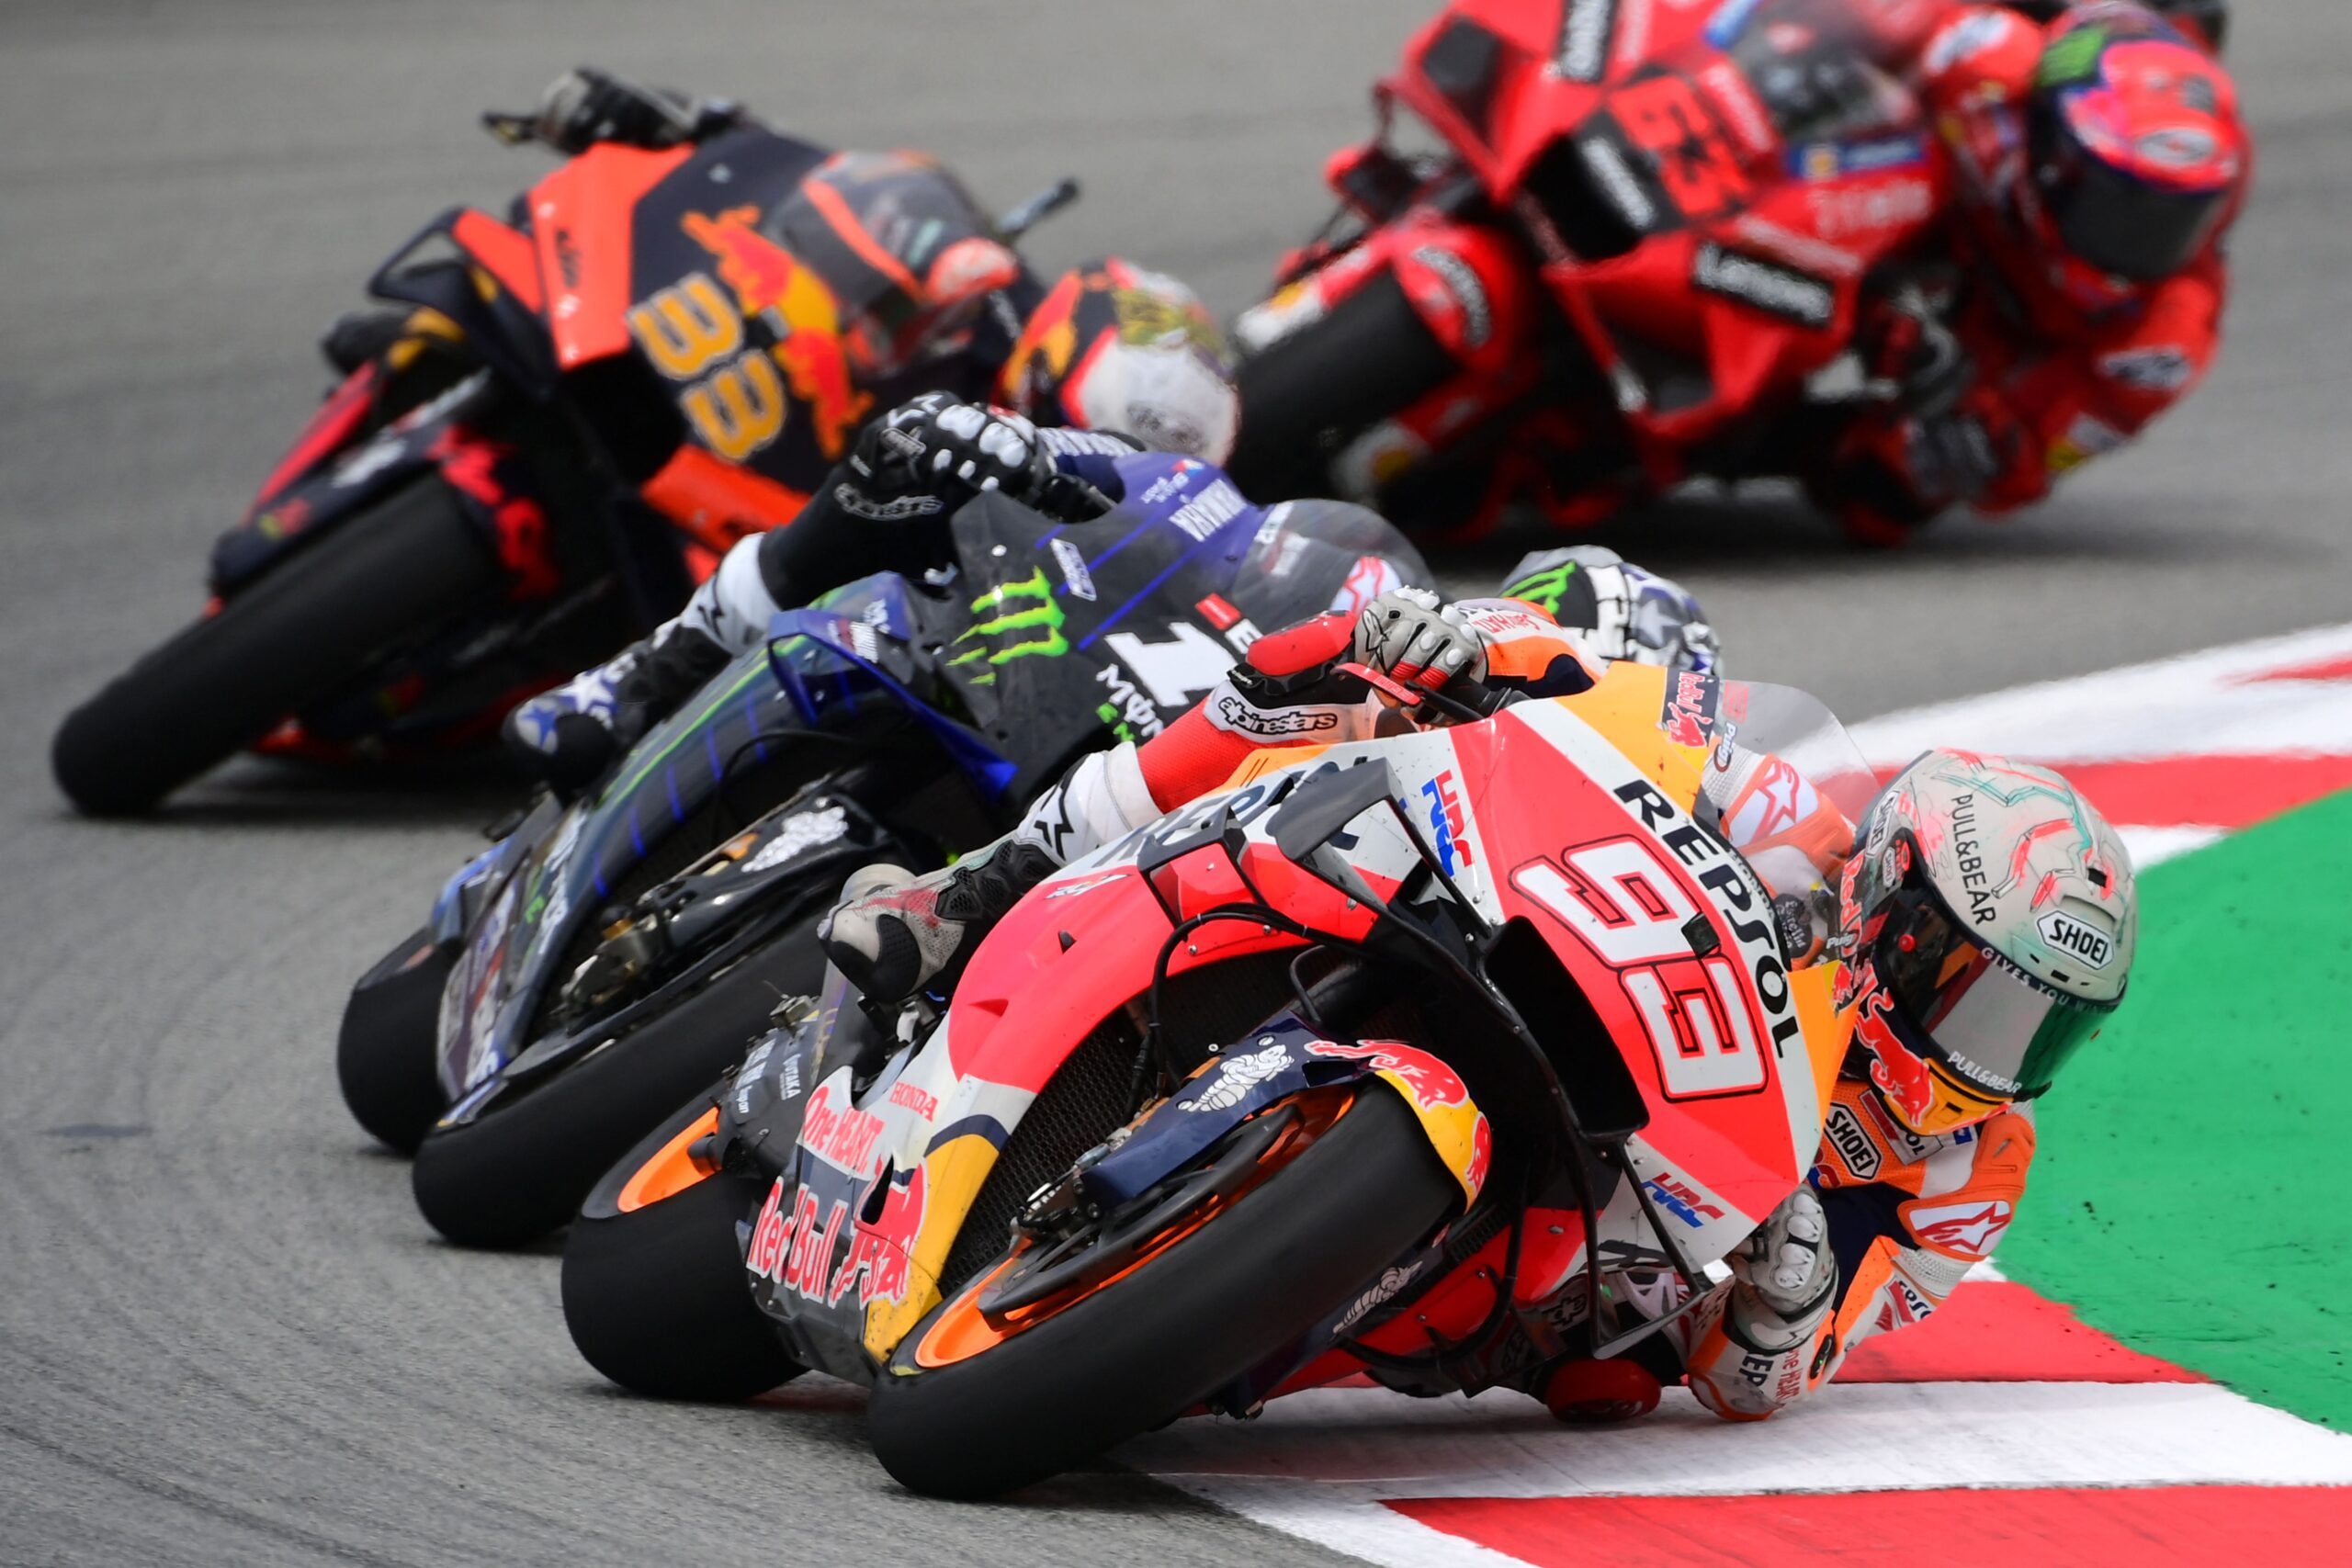 Honda Spanish rider Marc Marquez competes during the MotoGP race of the Moto Grand Prix de Catalunya at the Circuit de Catalunya on June 6, 2021 in Montmelo on the outskirts of Barcelona.